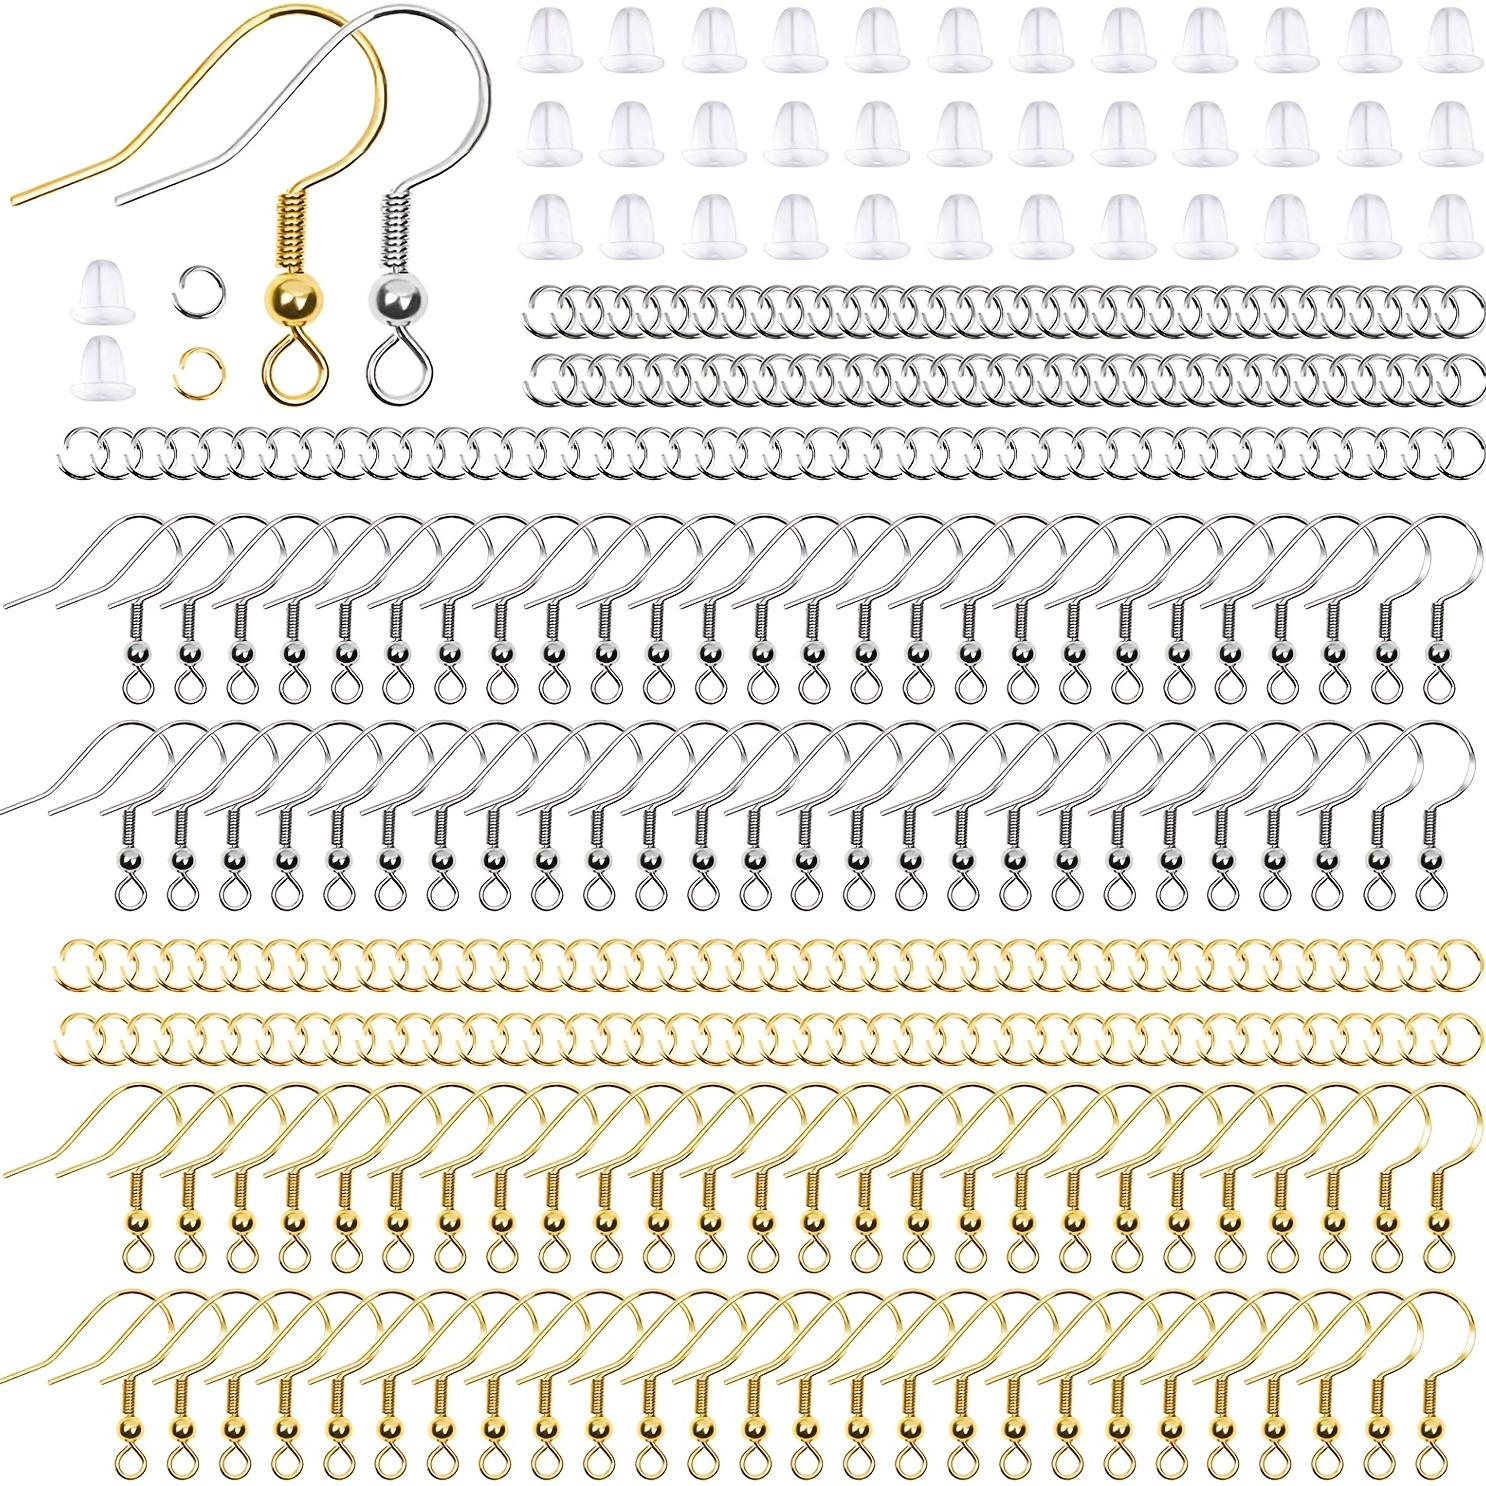 

Hypoallergenic Earring Hooks, 600pcs Earring Making Kit With Hypoallergenic Earring Hooks, Jump Rings And Clear Rubber Earring Backs For Diy Jewelry Making (silvery And Golden)